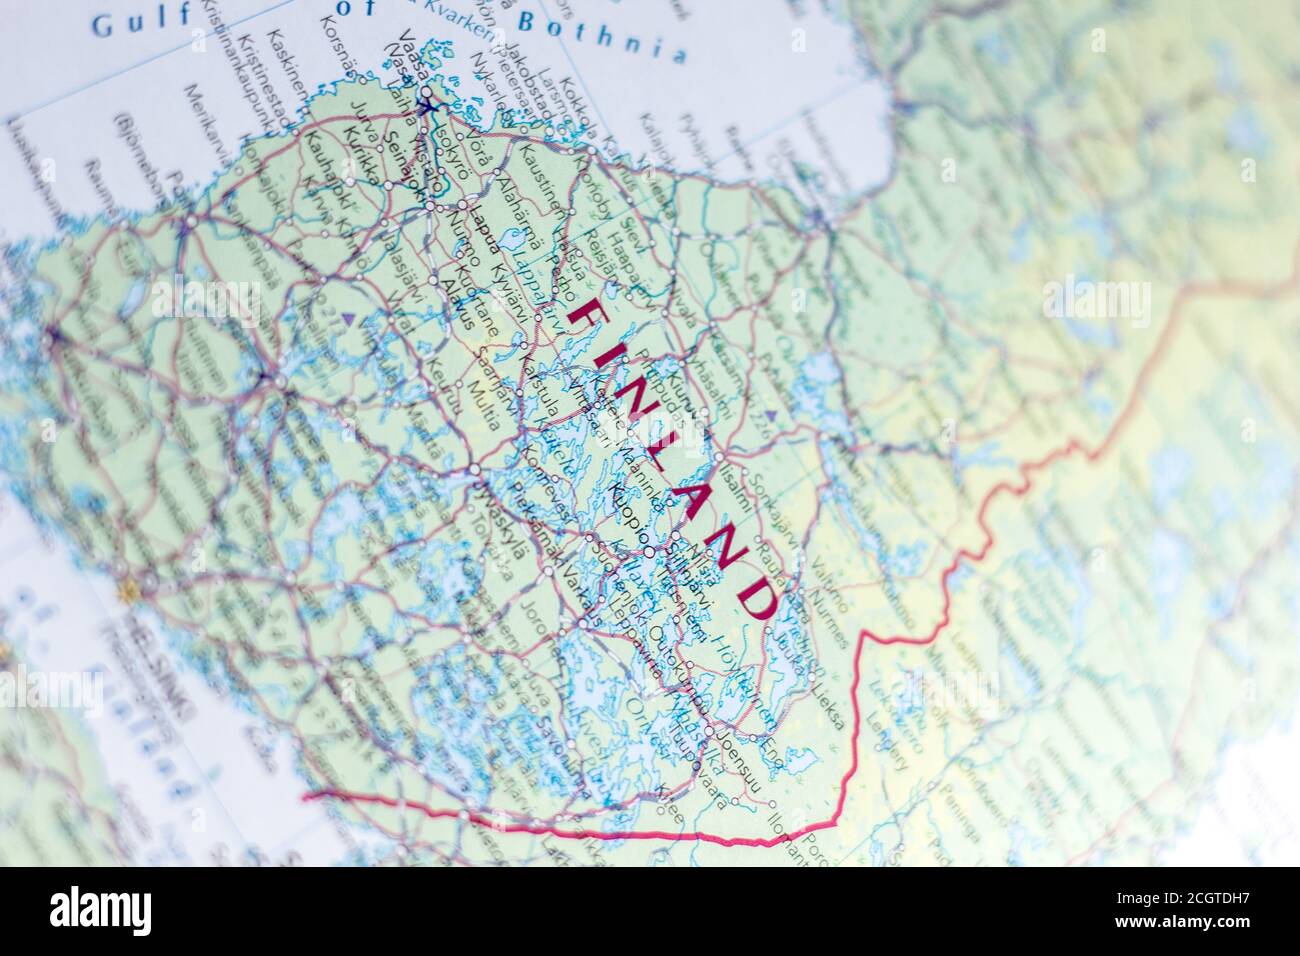 Ivanovsk, Russia - November 24, 2018: Finland on the map of the world Stock Photo